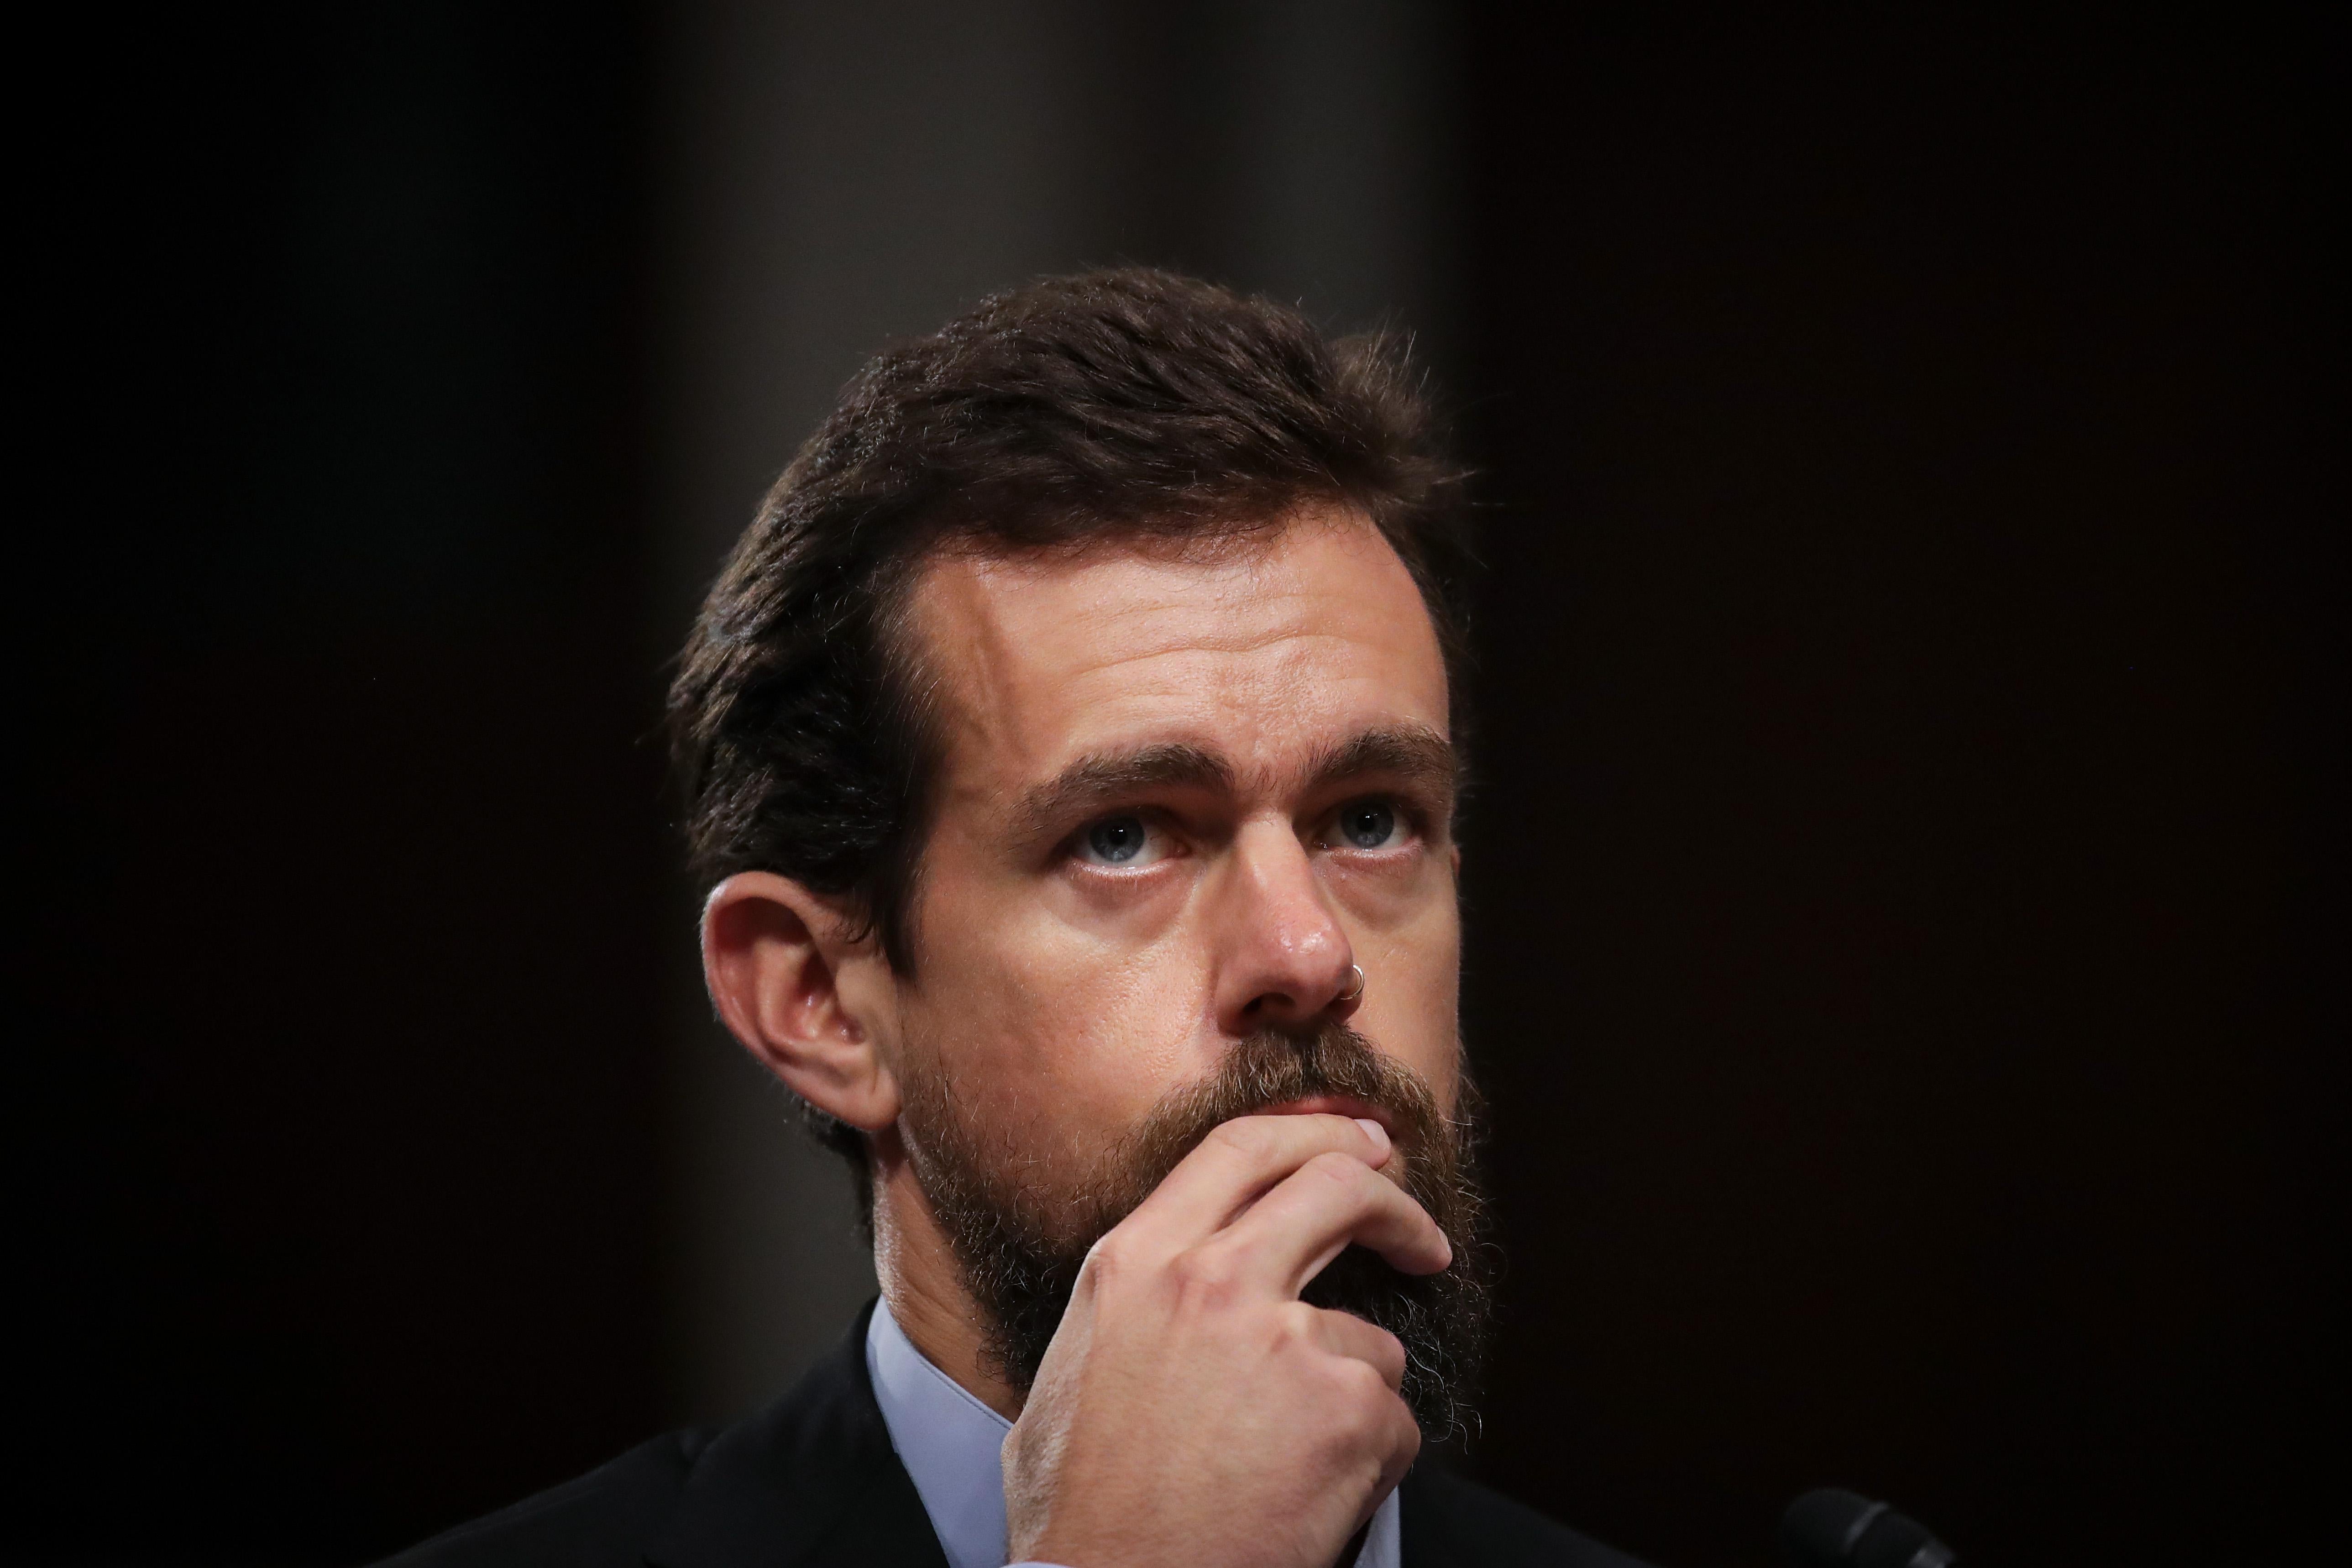 Twitter CEO Jack Dorsey with a thoughtful expression on his face at a congressional hearing.